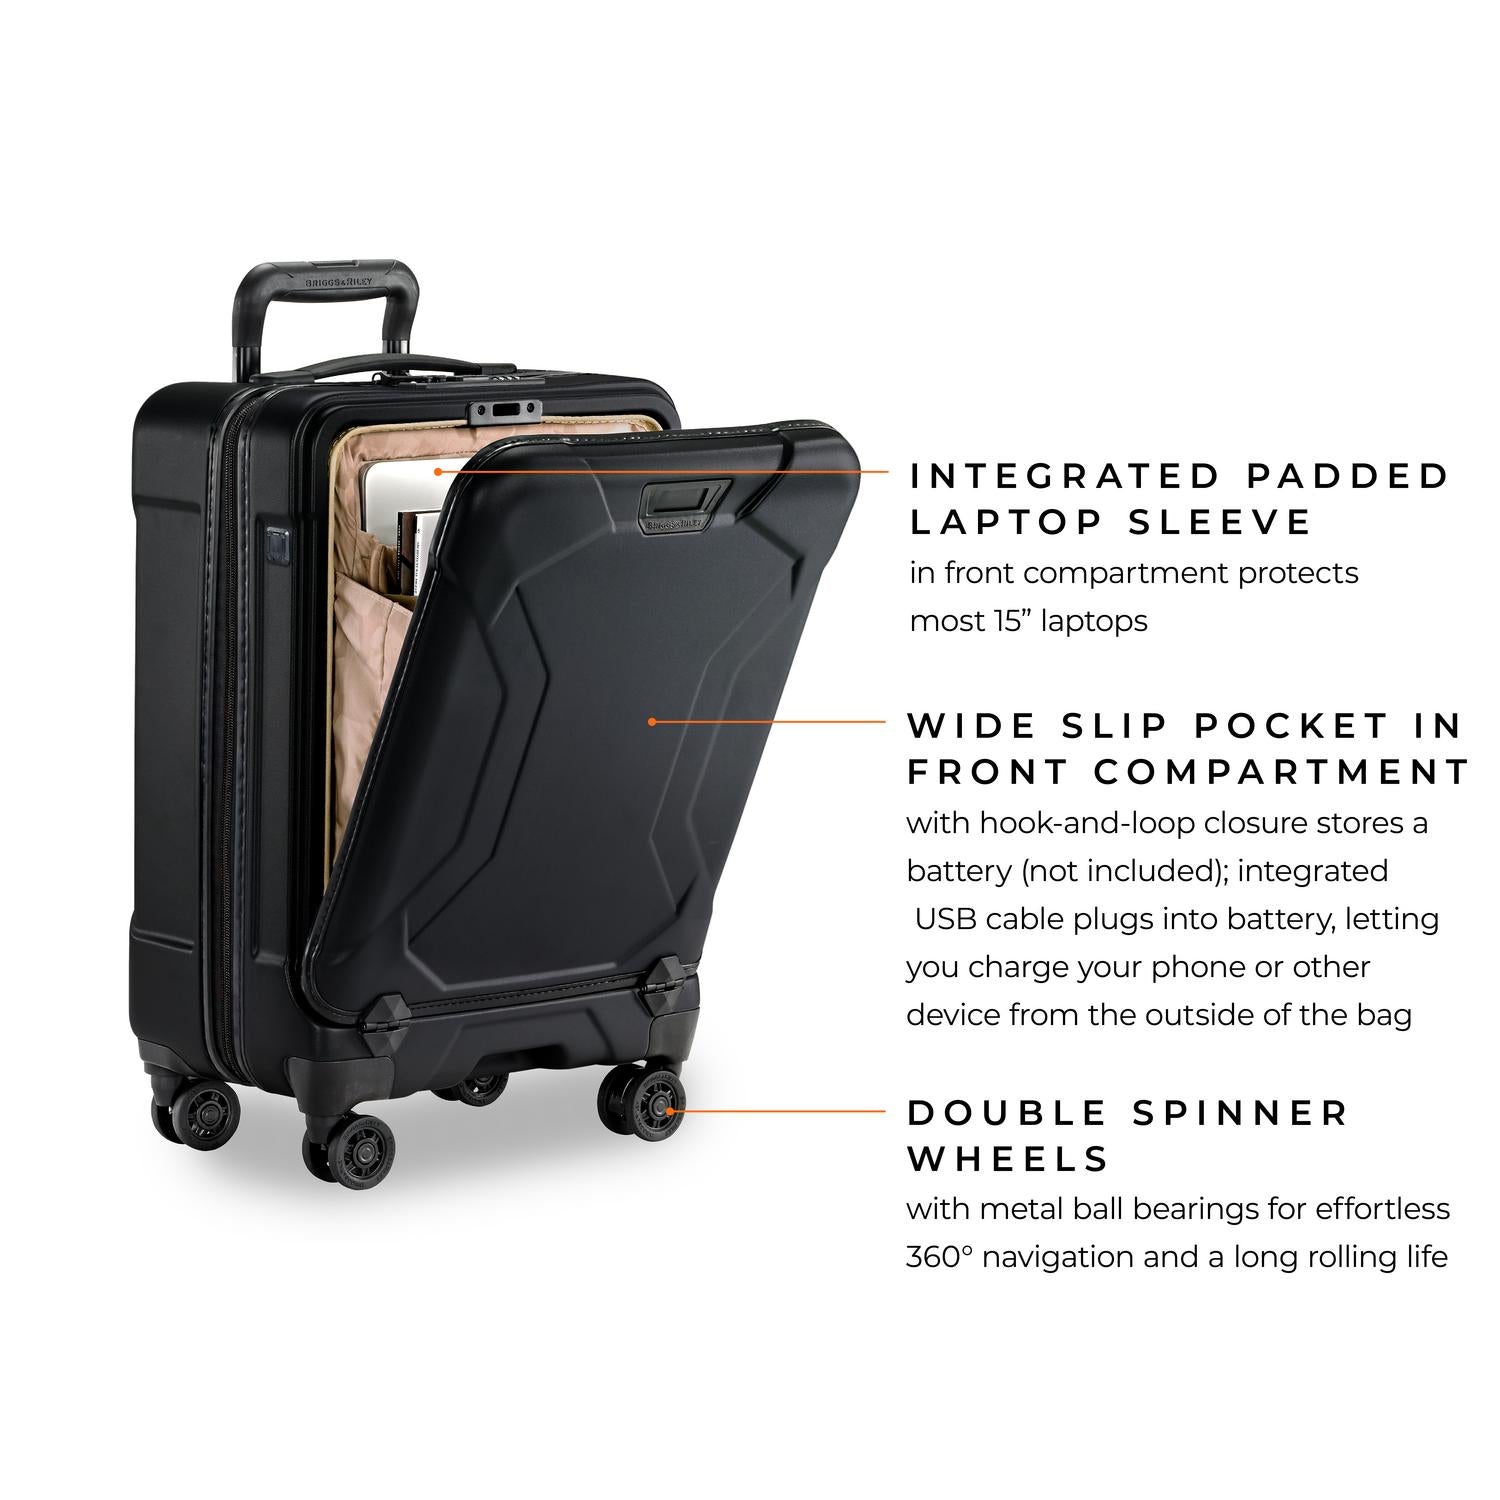 briggs & riley torq black international 21" carry-on spinner integrated padded laptop sleeve in front compartment protects most 15" laptops, wide slip pocket in front compartment with hook-and-loop closure stores a battery, integrated usb cable plus into battery, letting you charge your phone or other device from the outside of the bag, double spinner wheels with metal ball bearings for effortless 360 navigation and a long rolling life #color_stealth